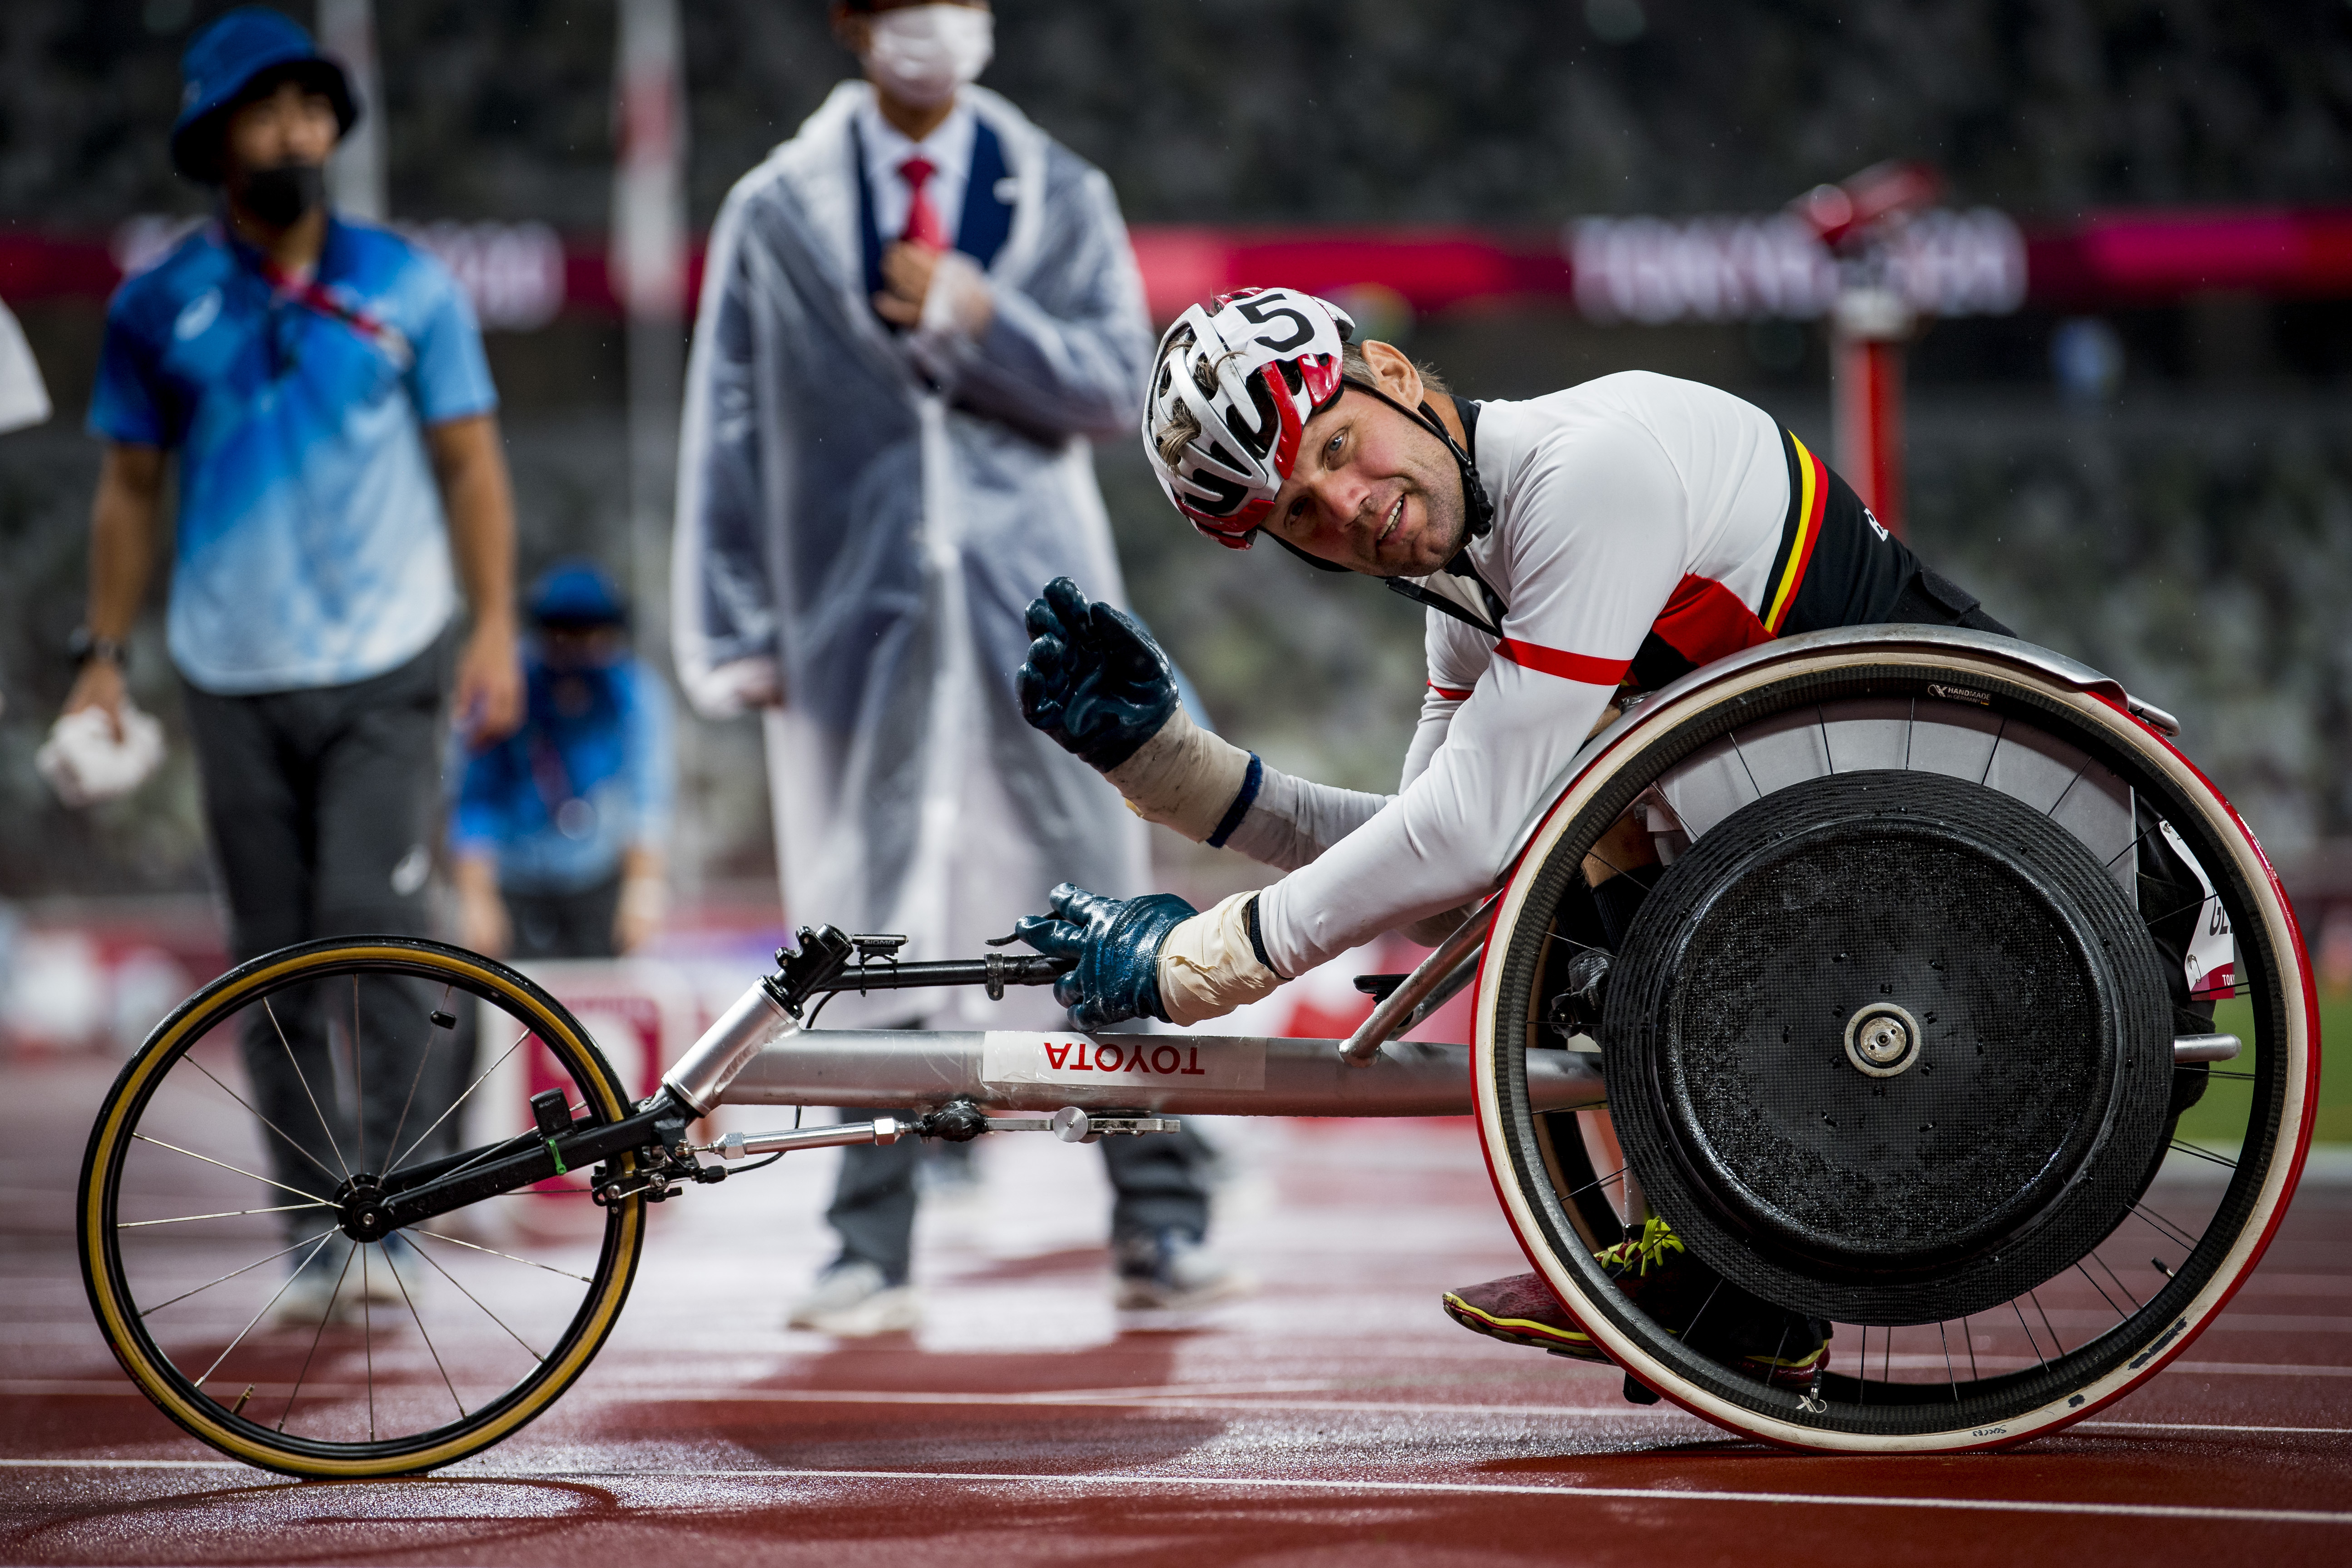 Paralympic Gold Medal Winner Claims Wheelchair Was 'Sabotaged' Before Race 